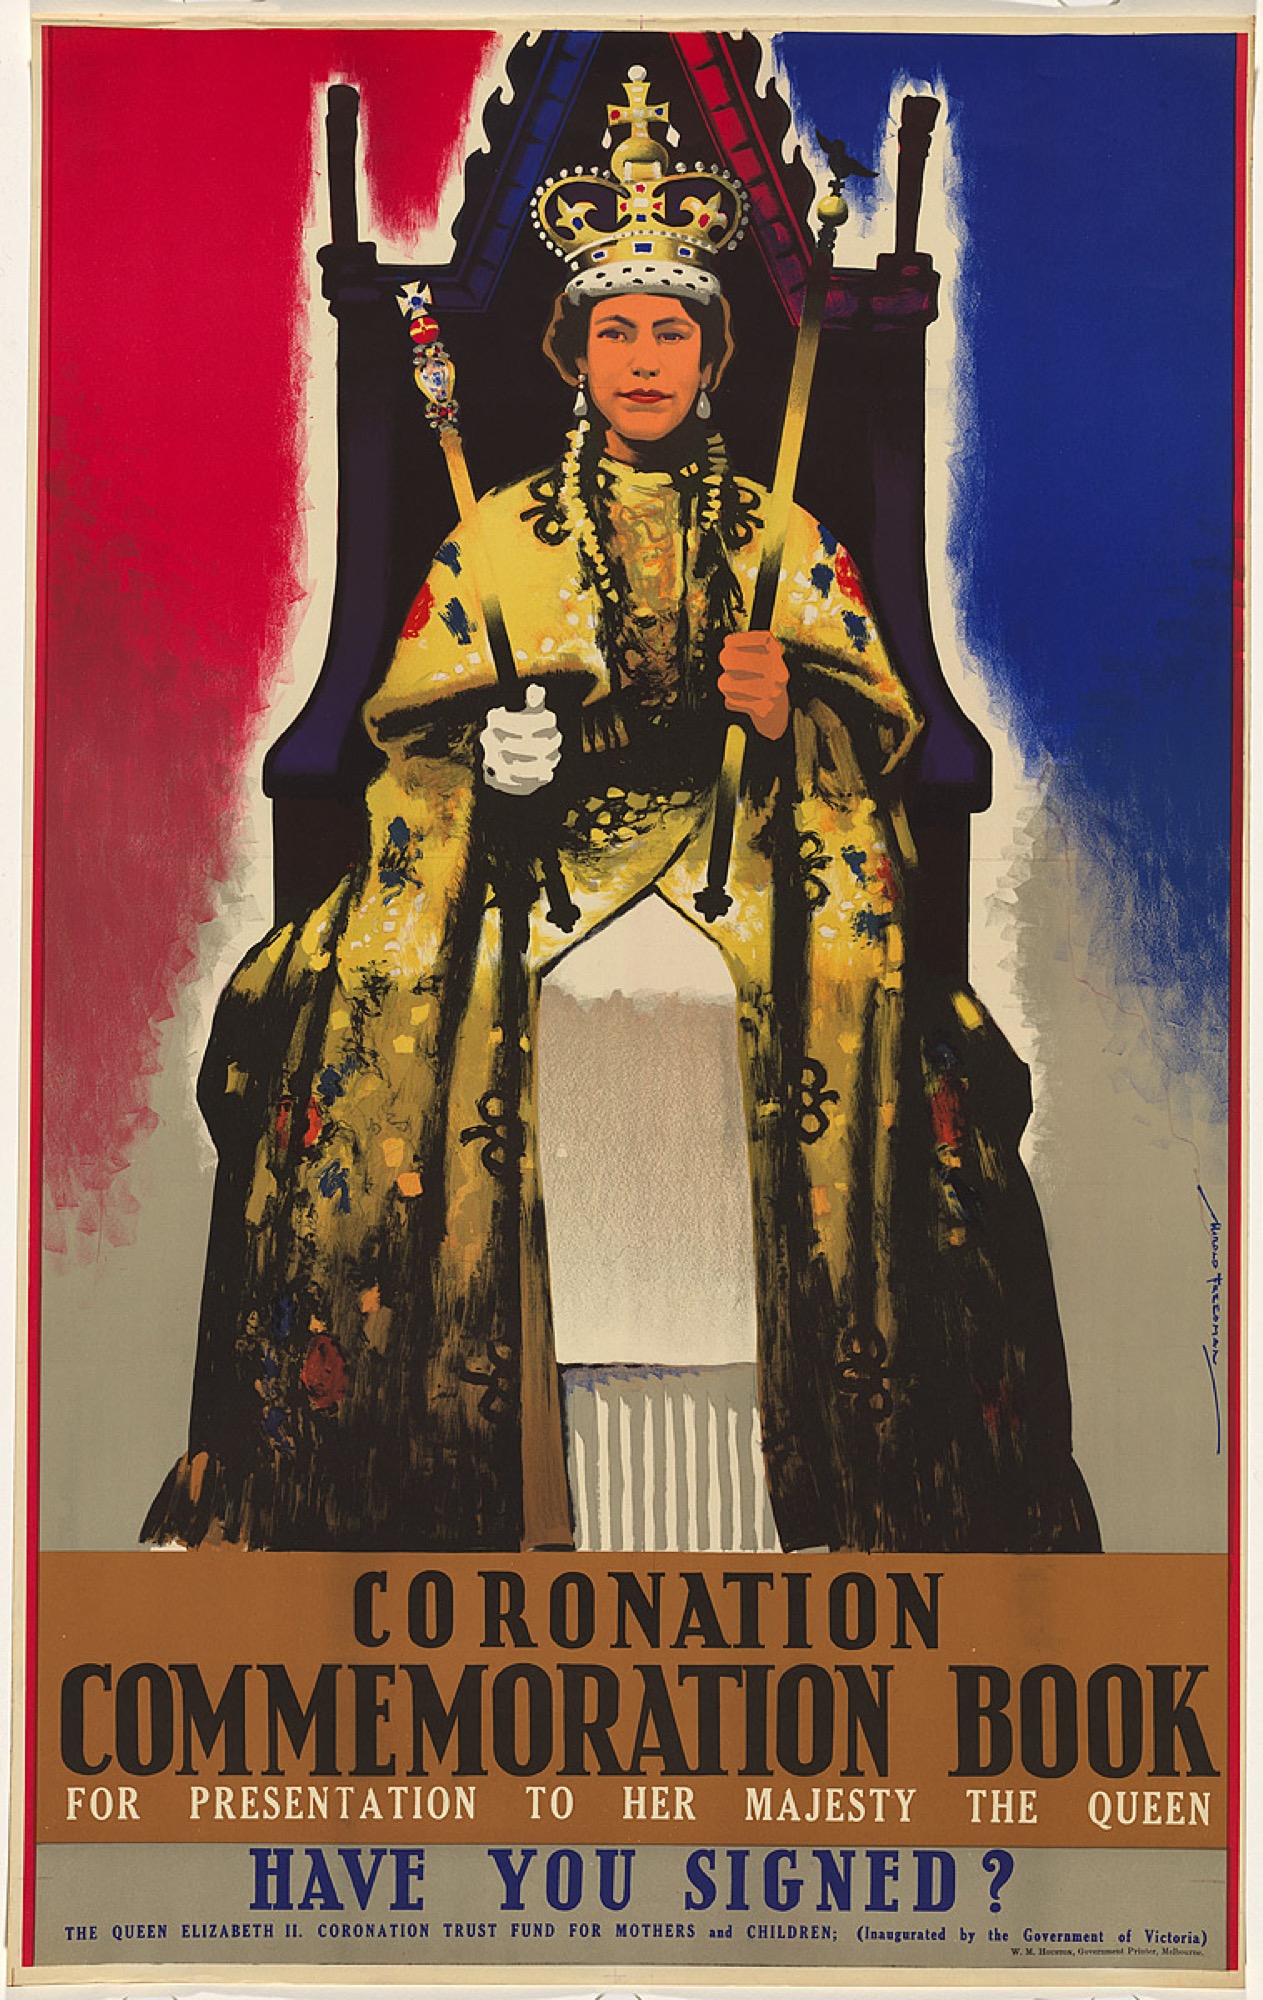 <em>Coronation Commemoration Book – Have you signed?</em>, 1953, off-set lithograph, printed in colour inks, from seven plates, 100.0 x 62.5 cm (printed image and text), Collection: National Gallery of Australia, Canberra